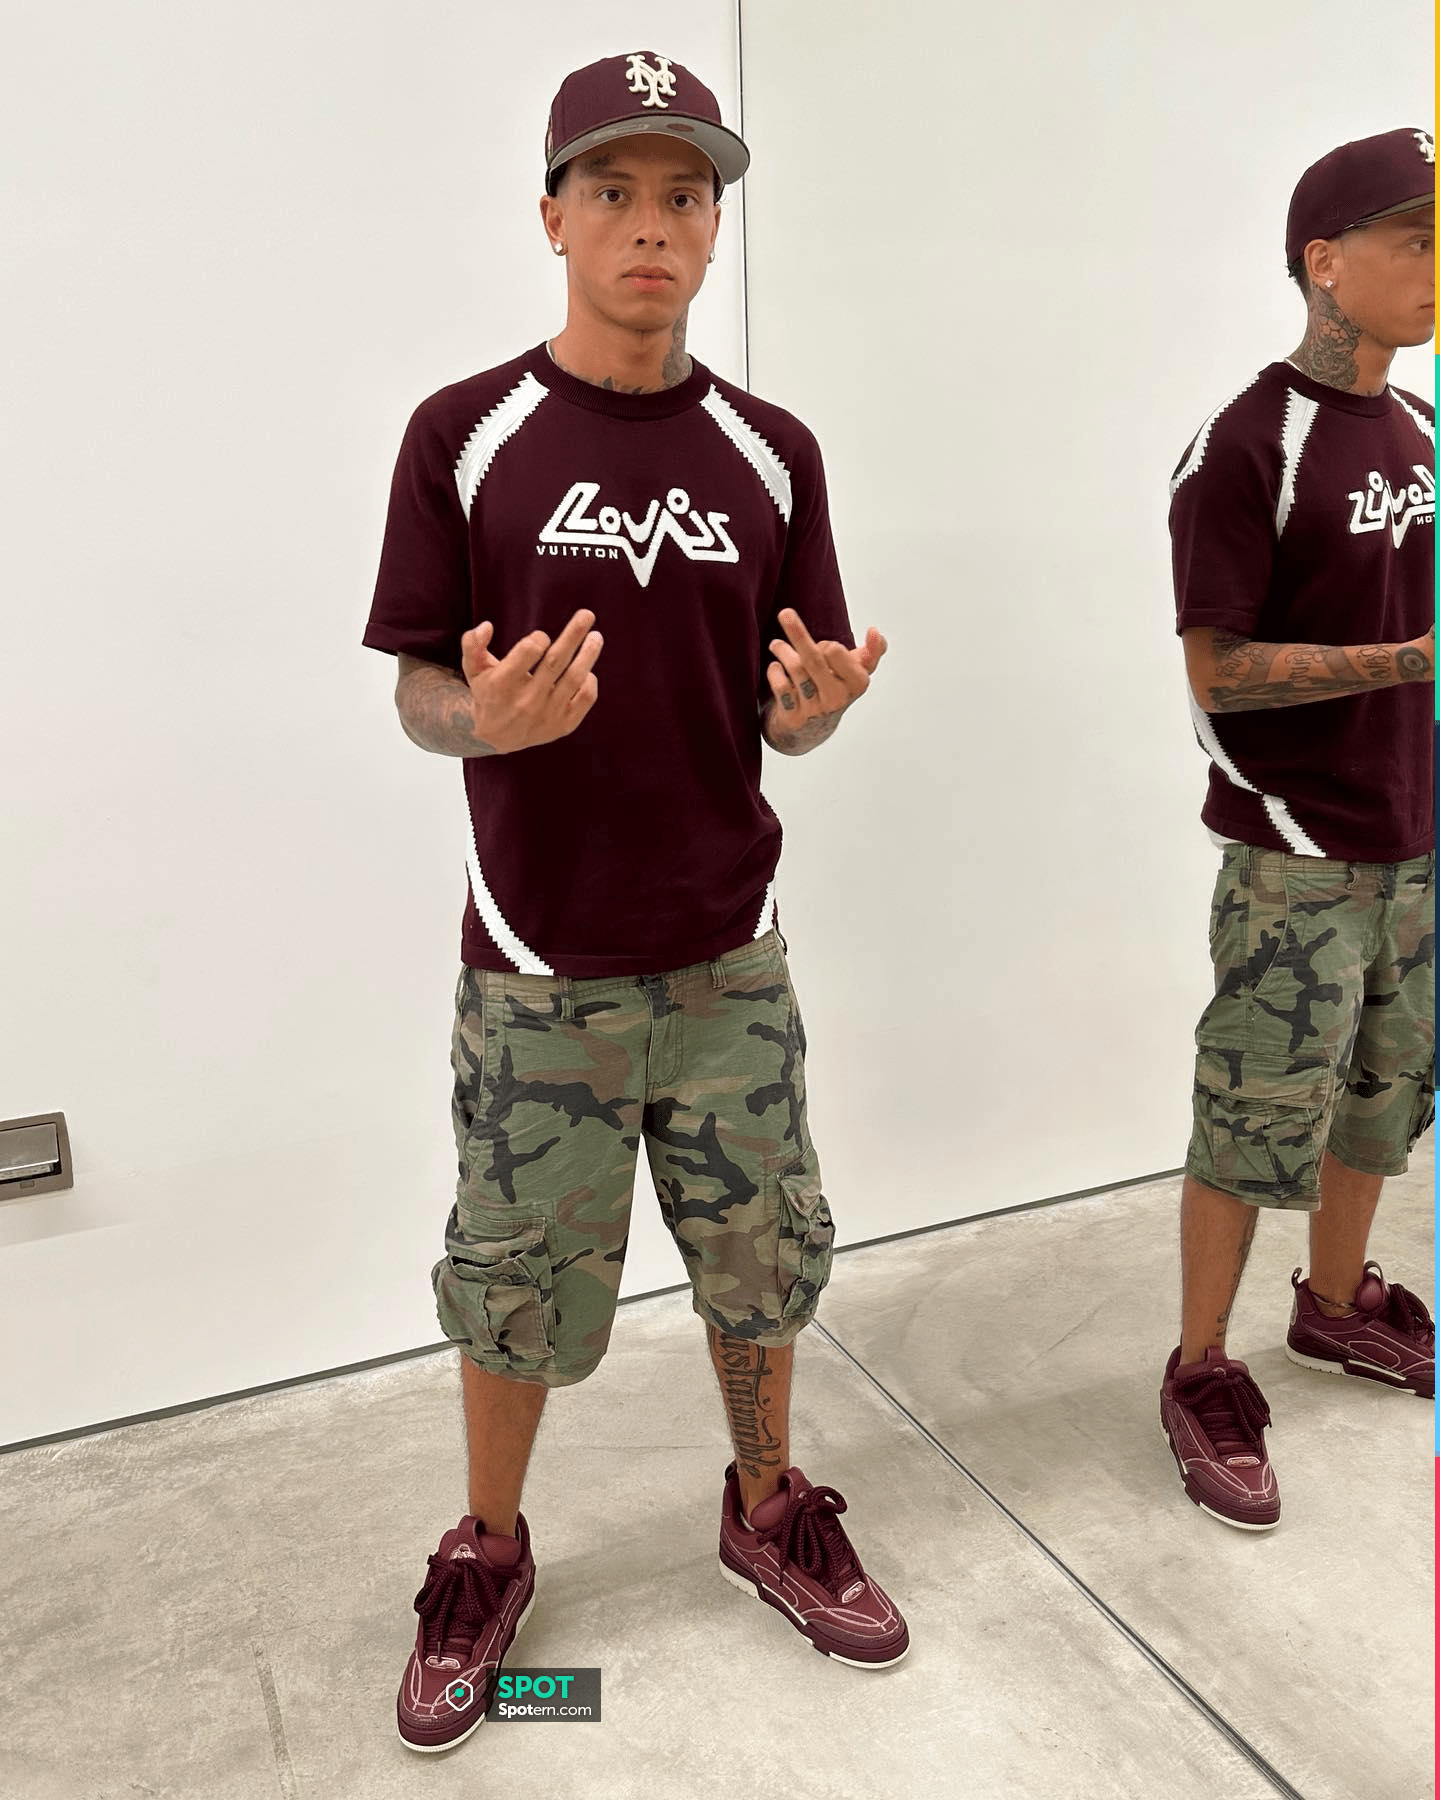 Louis Vuitton Burgundy LV Skate Sneakers worn by Central Cee on his  Instagram account @centralcee